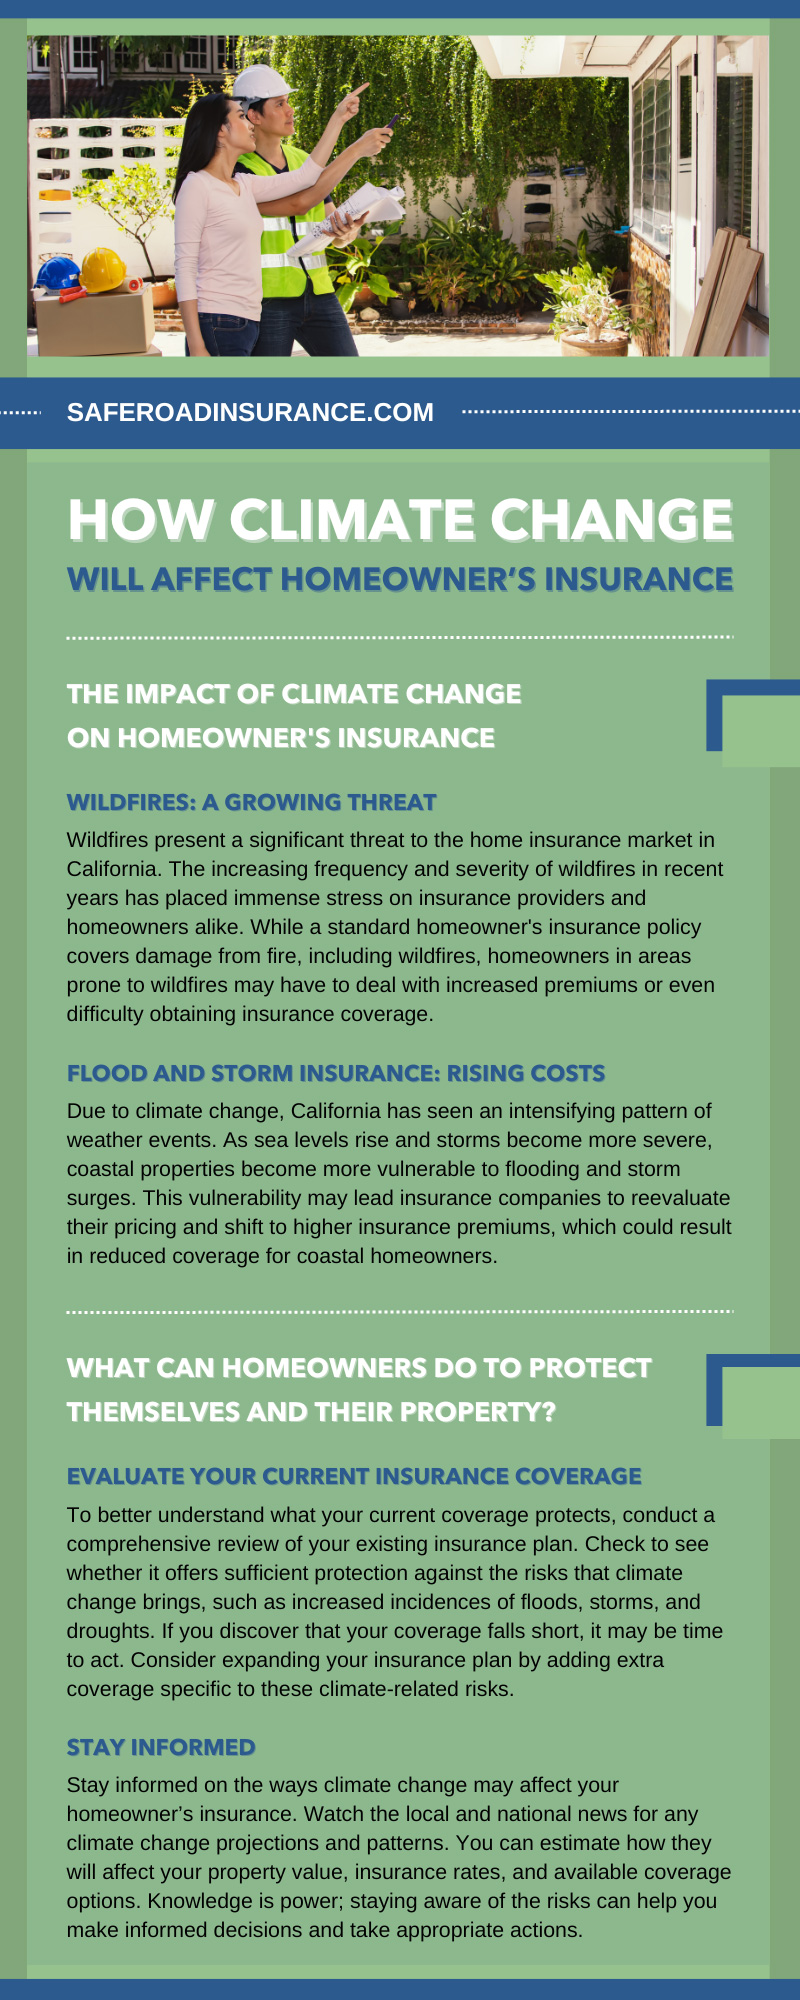 How Climate Change Will Affect Homeowner’s Insurance